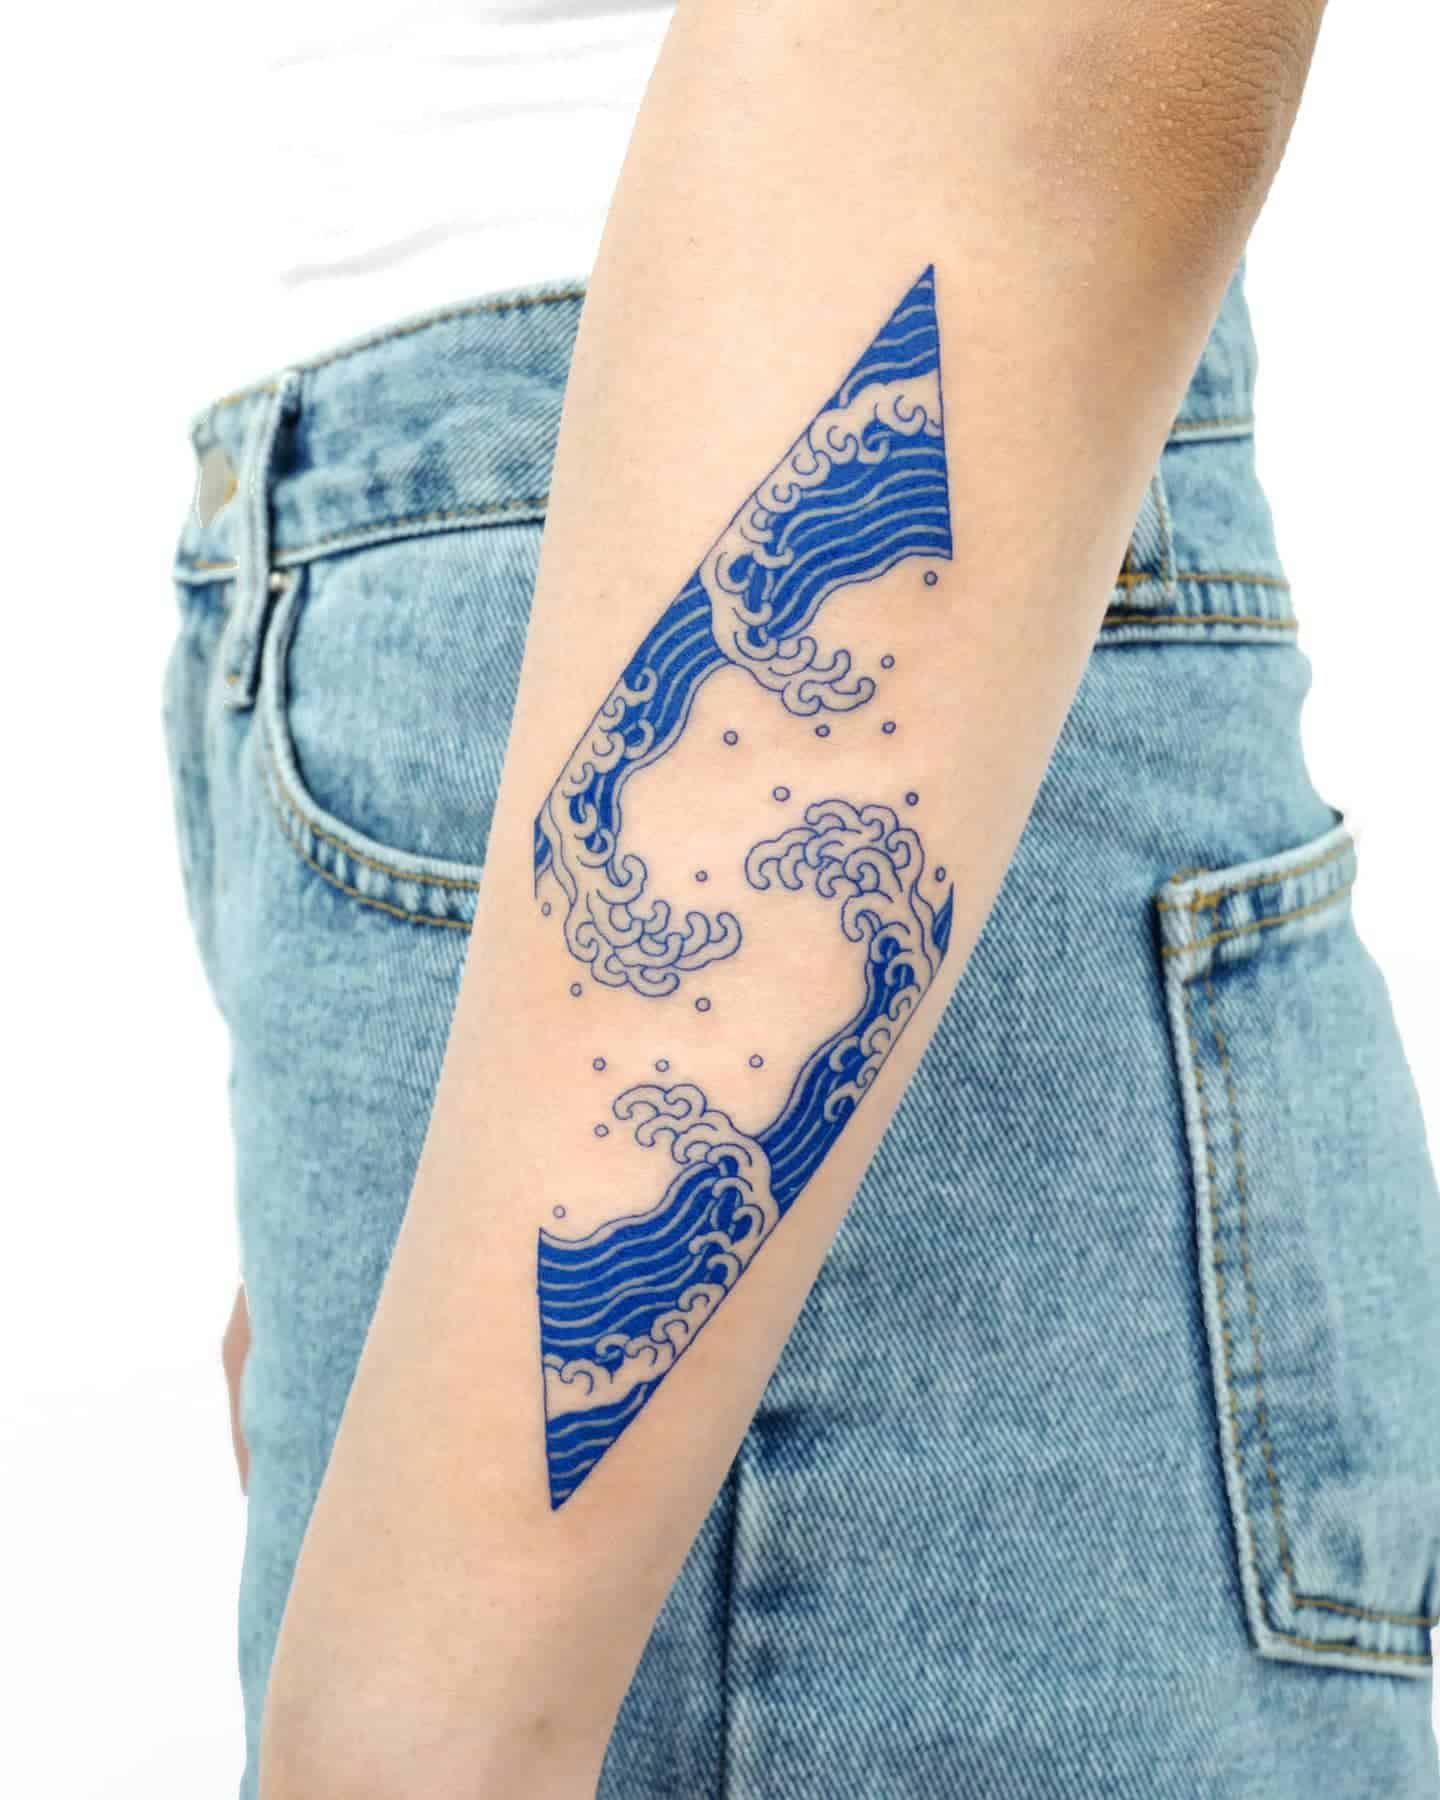 Riding The Waves Of Tattoo Art The Symbolic Meaning Of Wave Tattoos   TATTOOGOTO